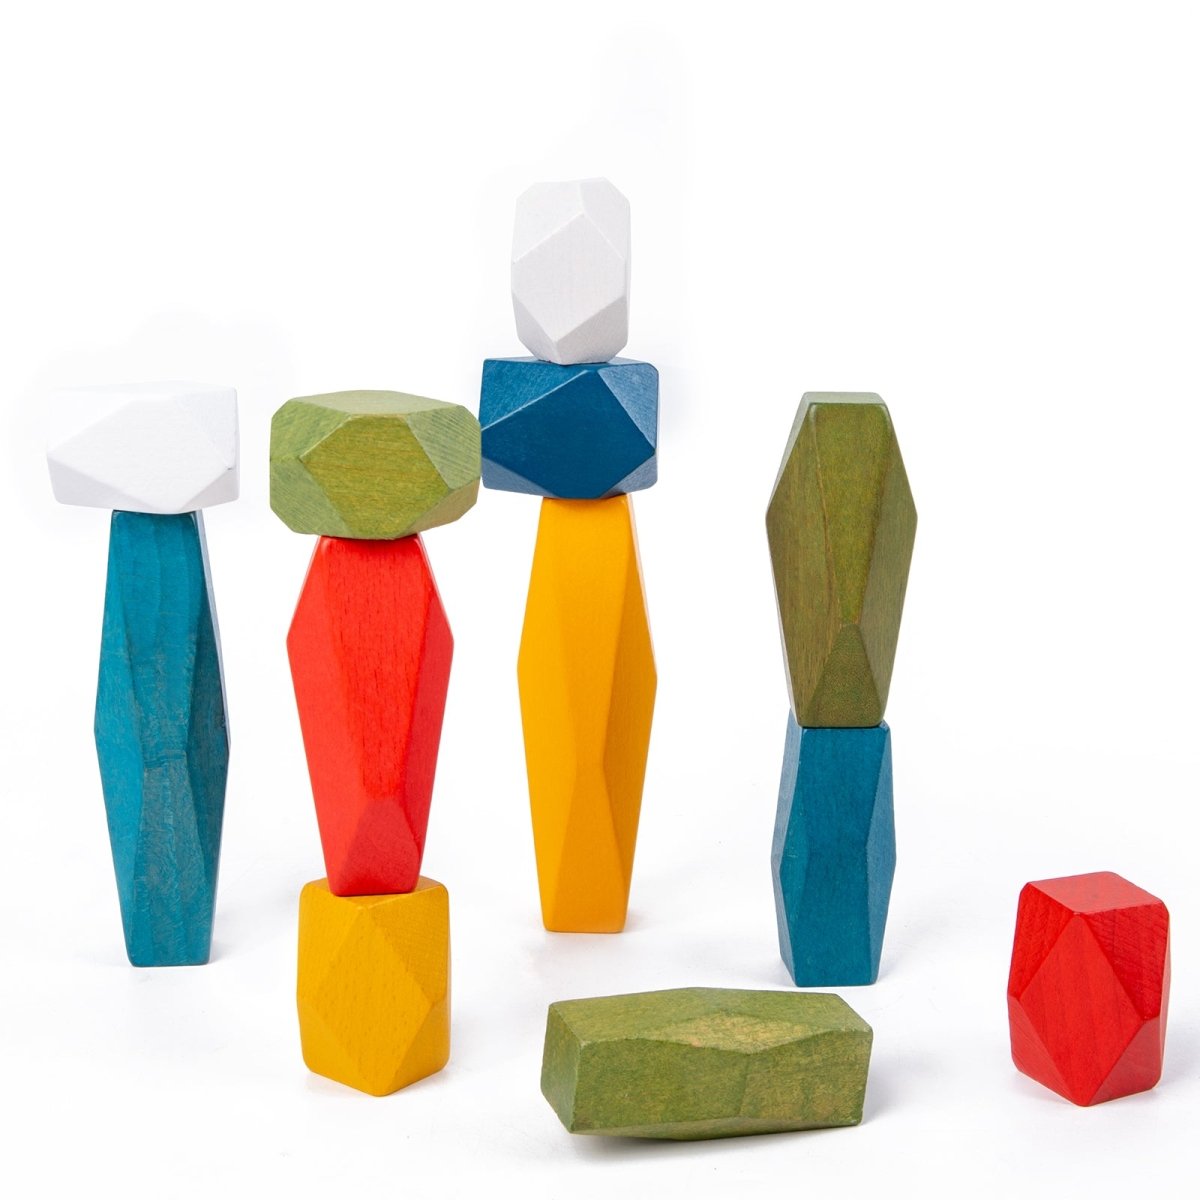 Jumbo Colored Stacking Stones - Jumbo Colored Stacking Stones - Curious Melodies